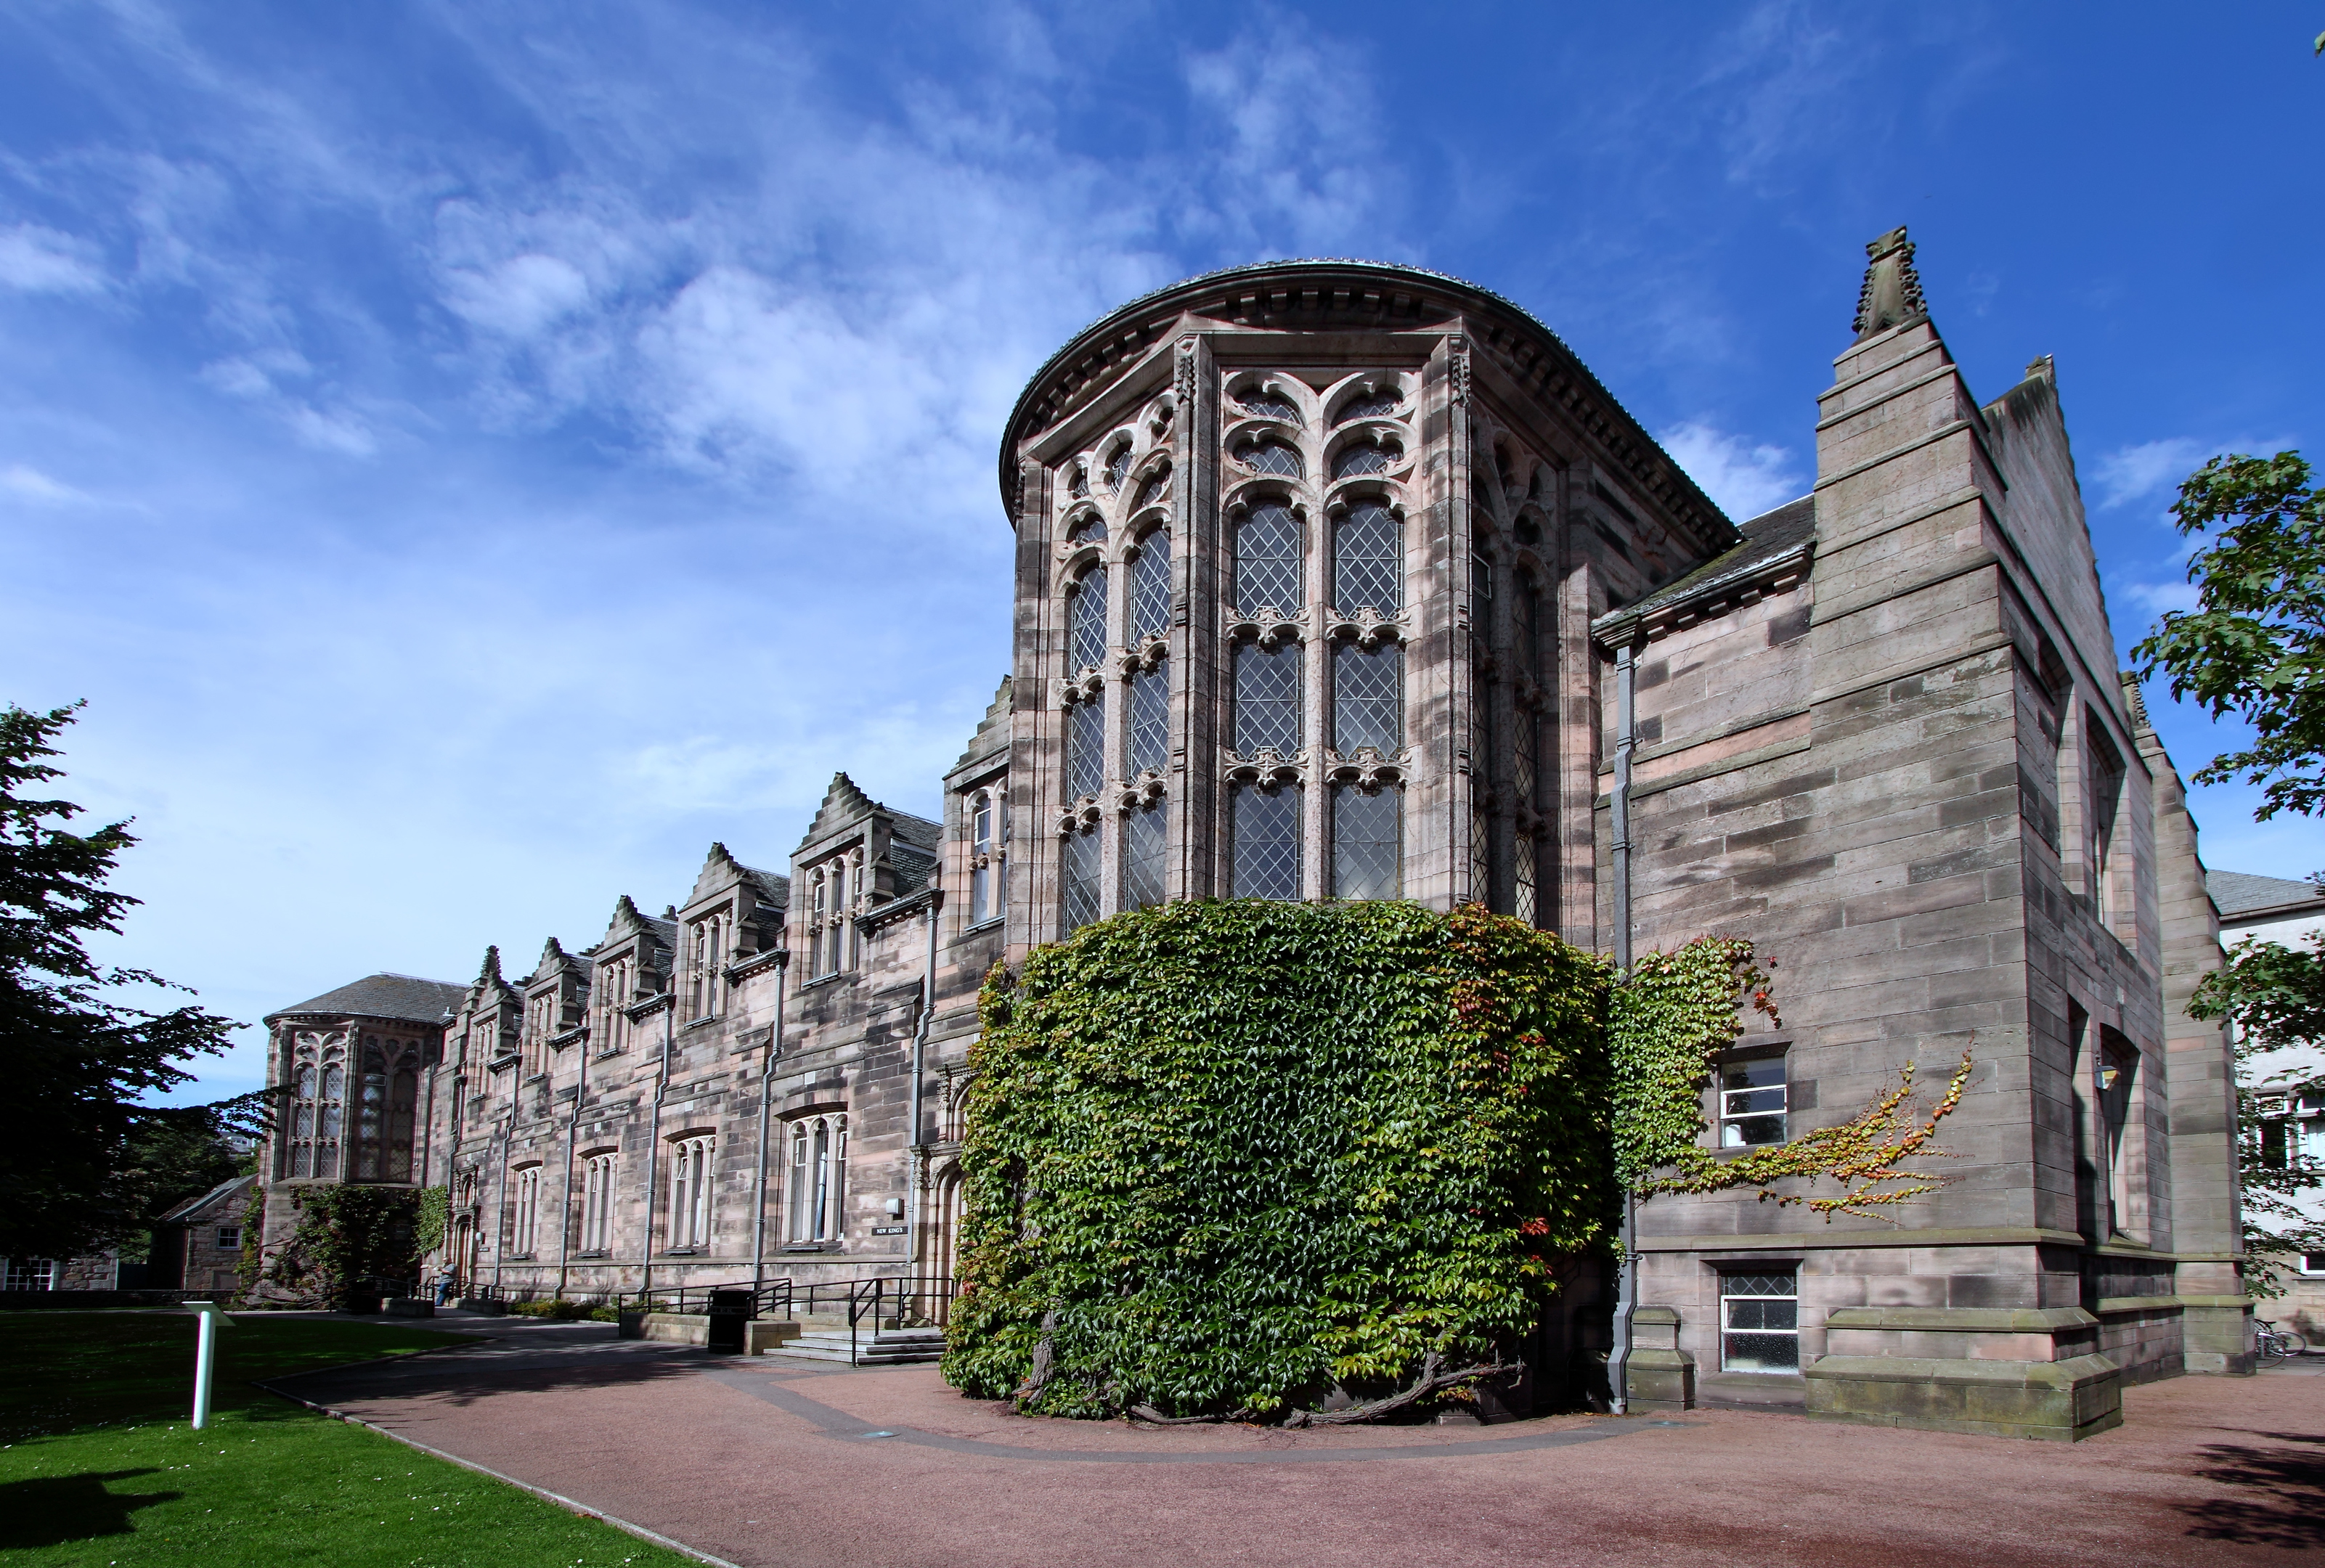 A senior member of staff at Aberdeen University has been recorded on video charging at students (Getty Images/iStock)